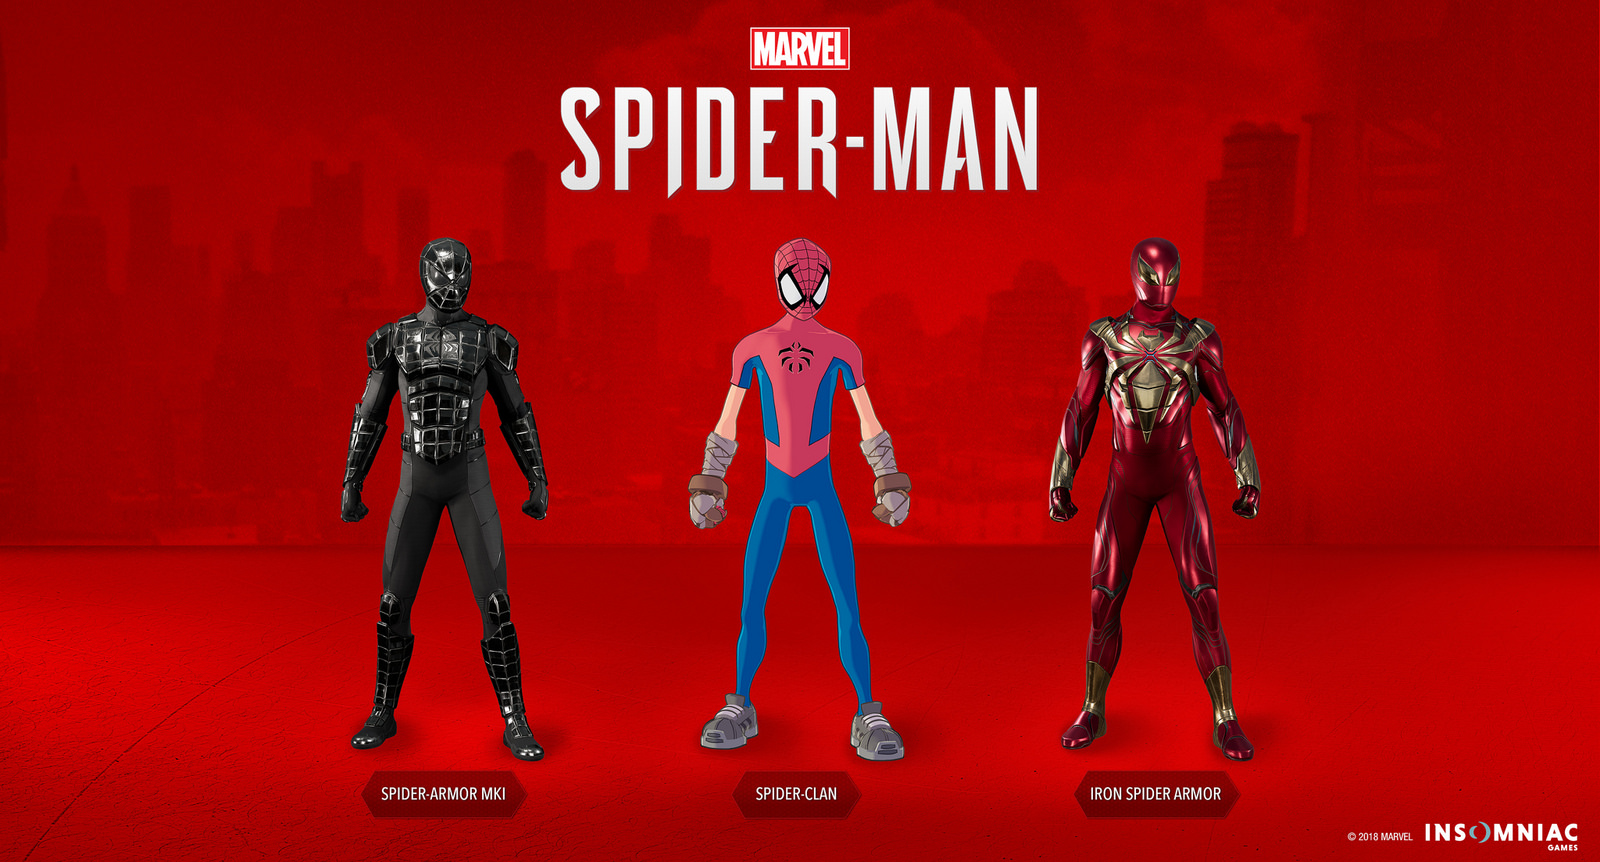 The three new Spider-Man suits